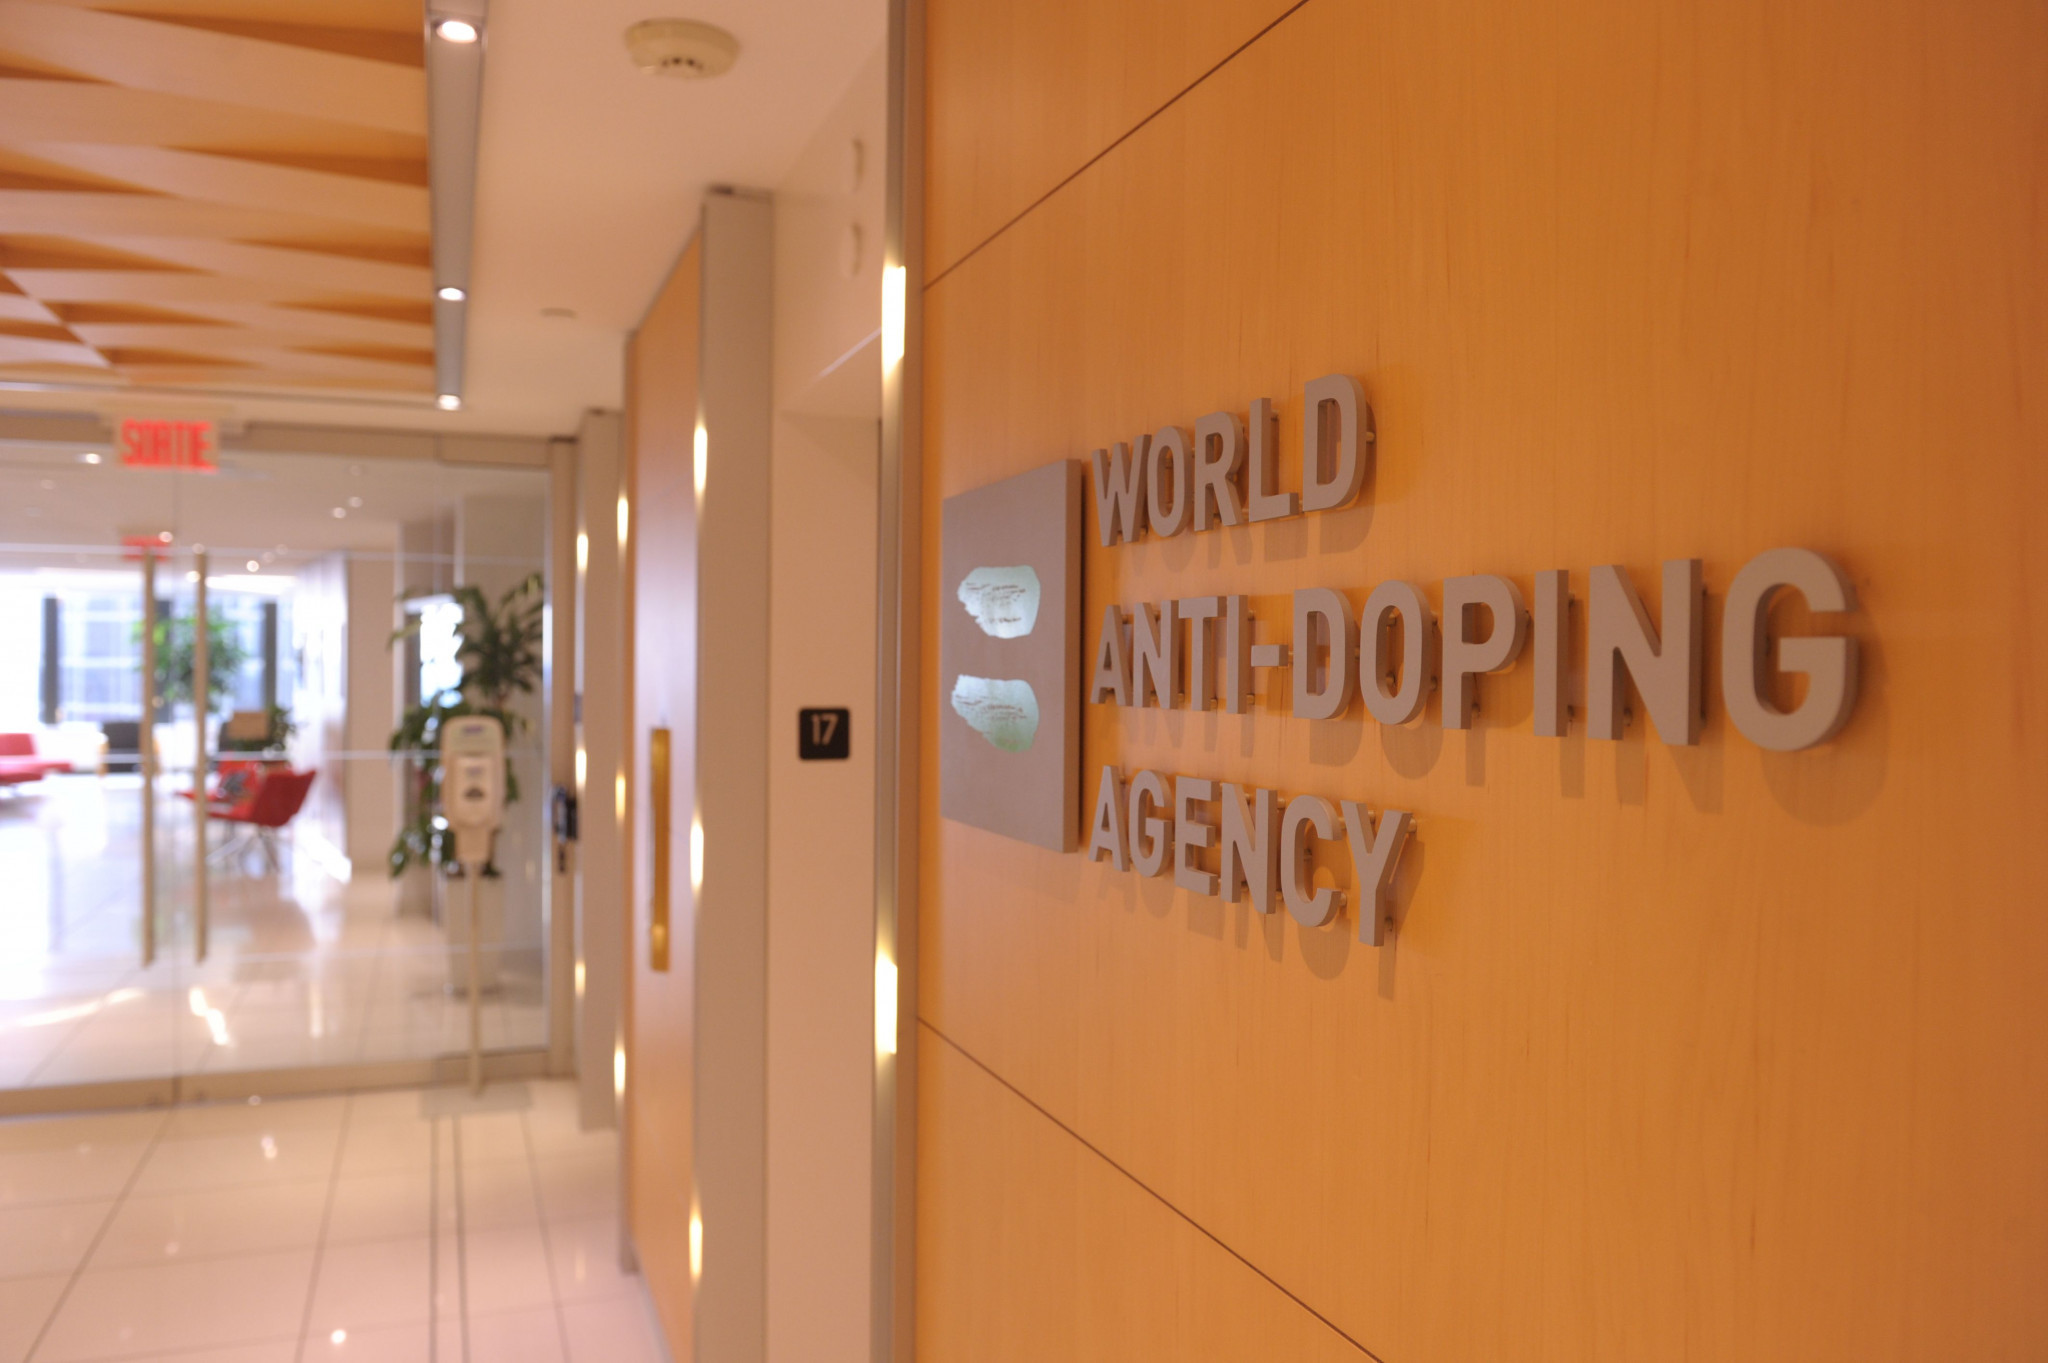 Ukraine’s National Anti-Doping organisation has committed the wrongdoings since 2012, the WADA report claims ©Getty Images